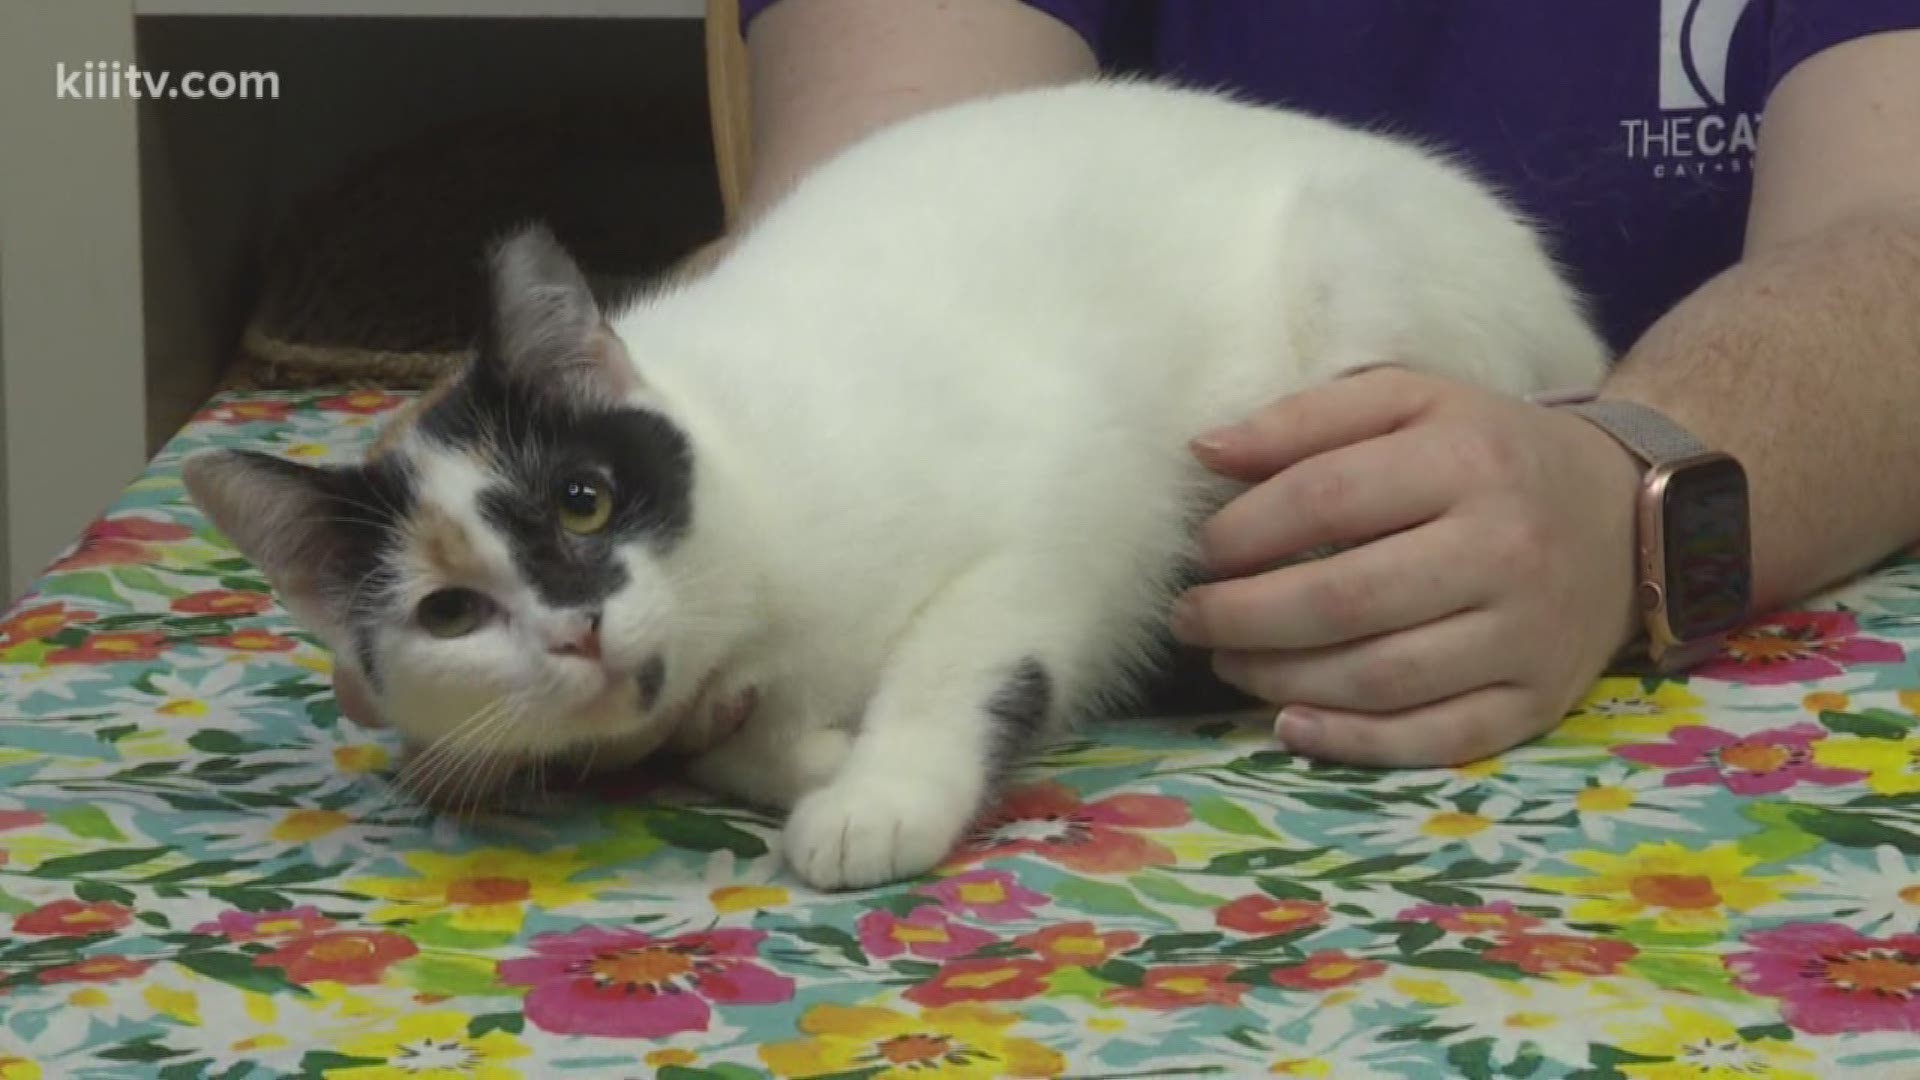 Adopt from the Cattery Cat Shelter on today's Paws for Pets.